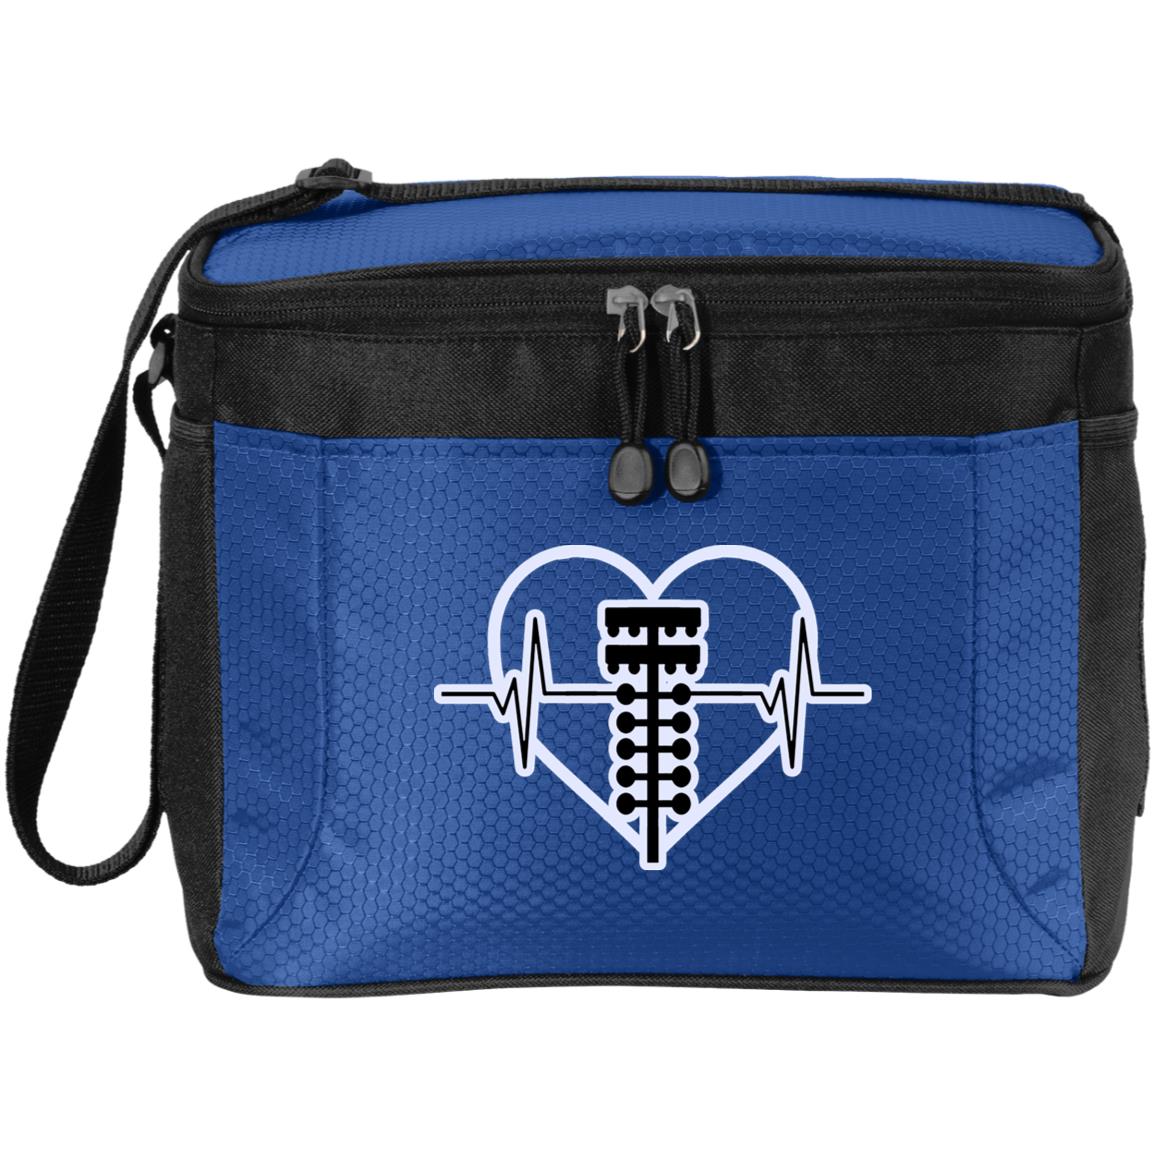 Drag Racing Heartbeat 12-Pack Cooler